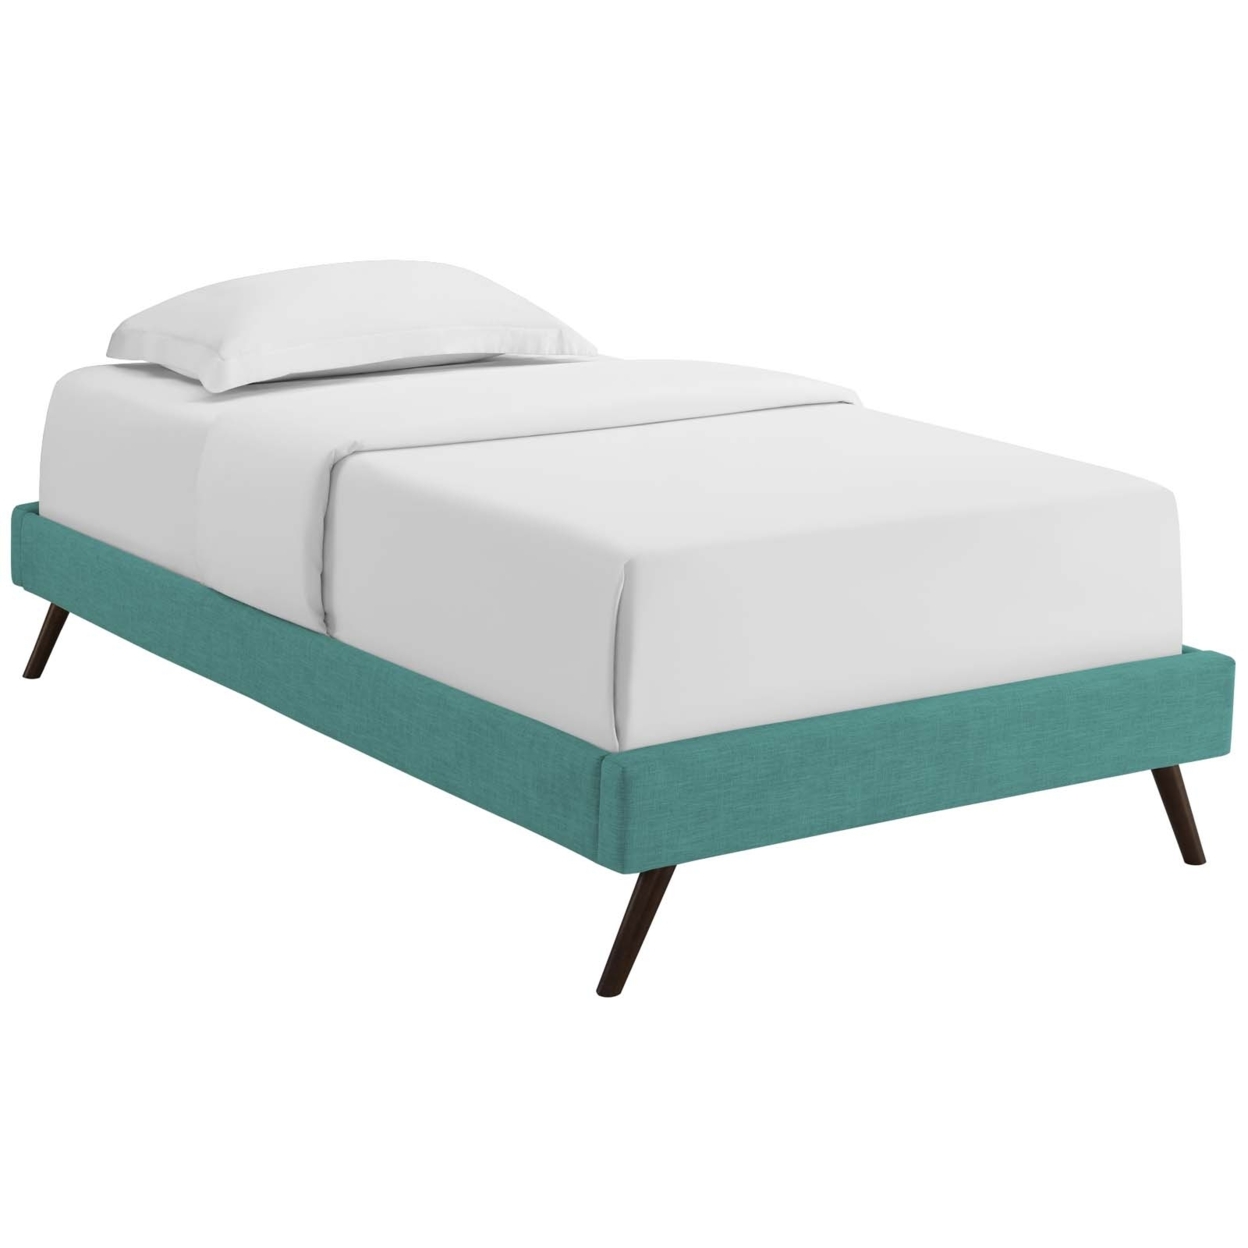 Loryn Twin Fabric Bed Frame With Round Splayed Legs, Teal